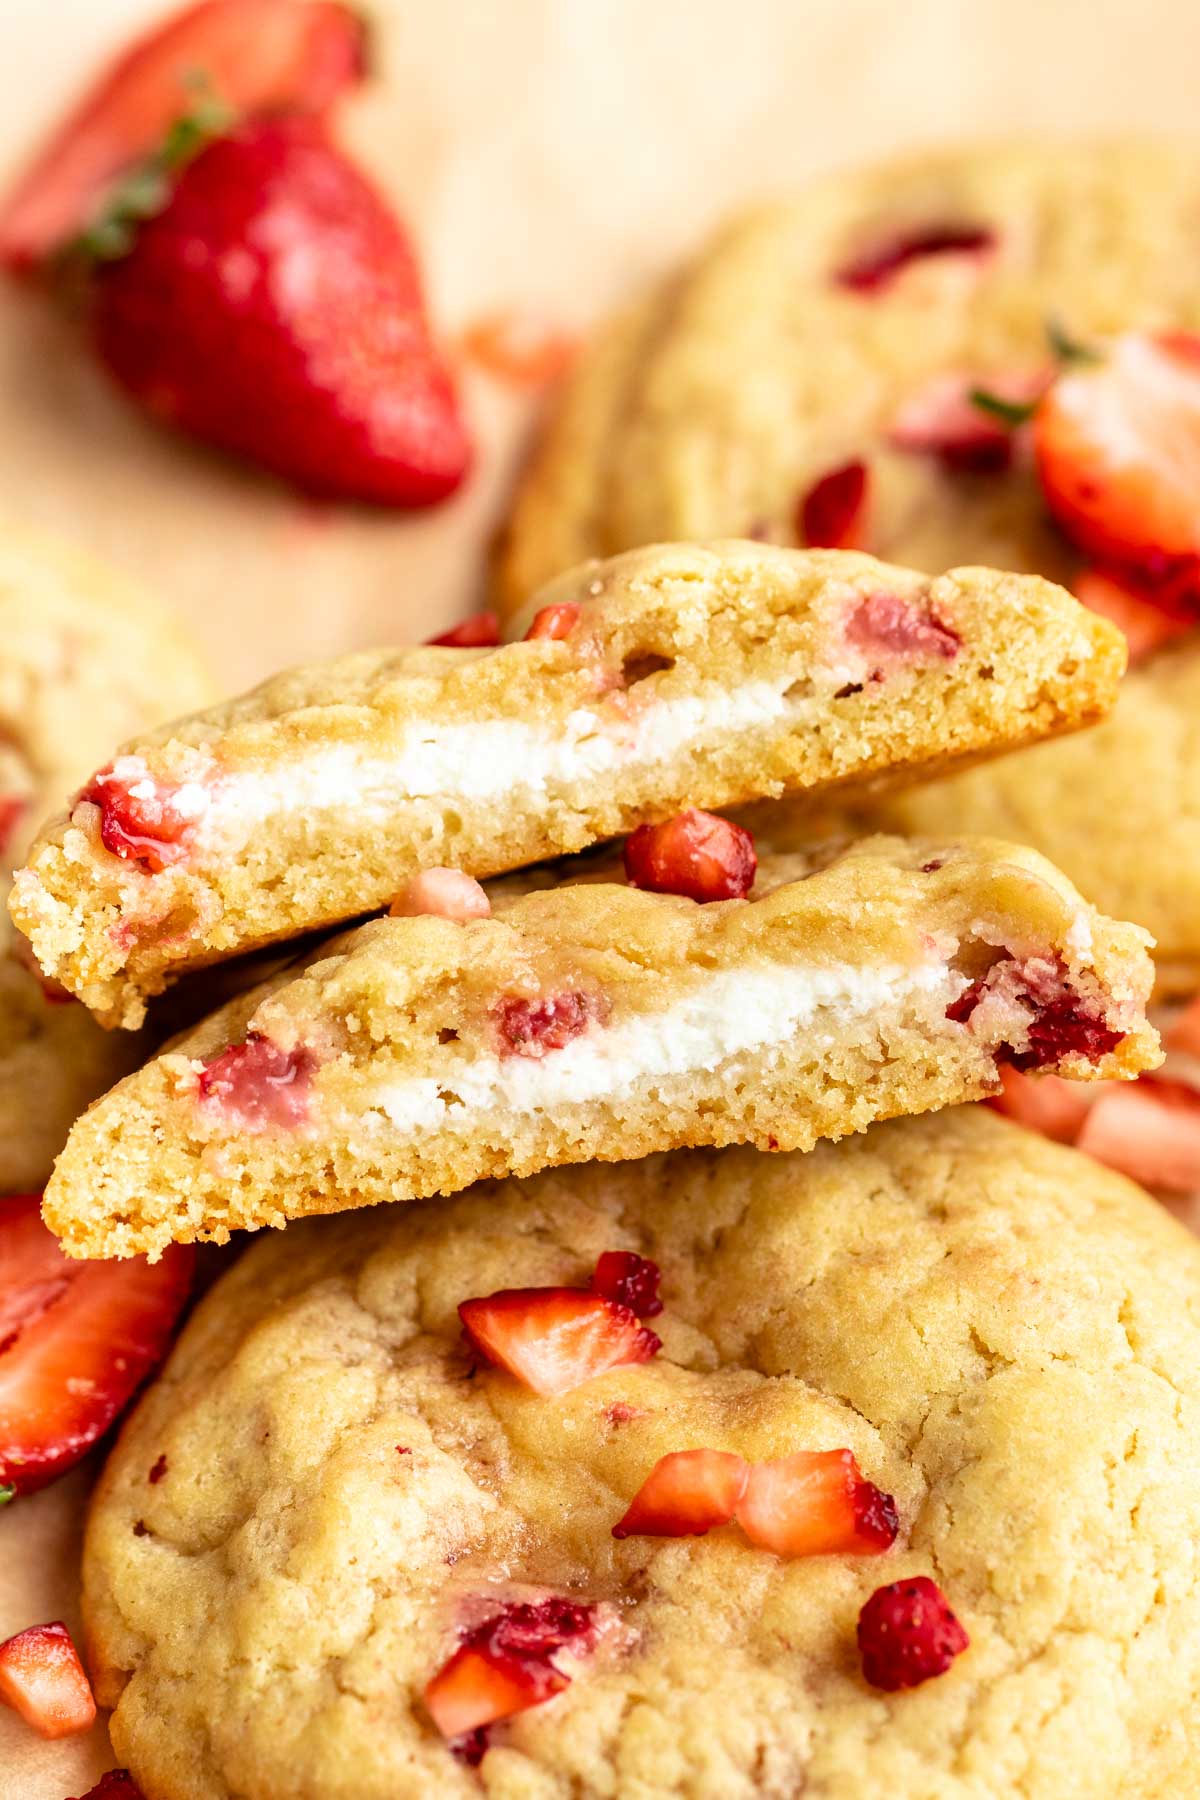 Cream cheese strawberry cookies cut in half.